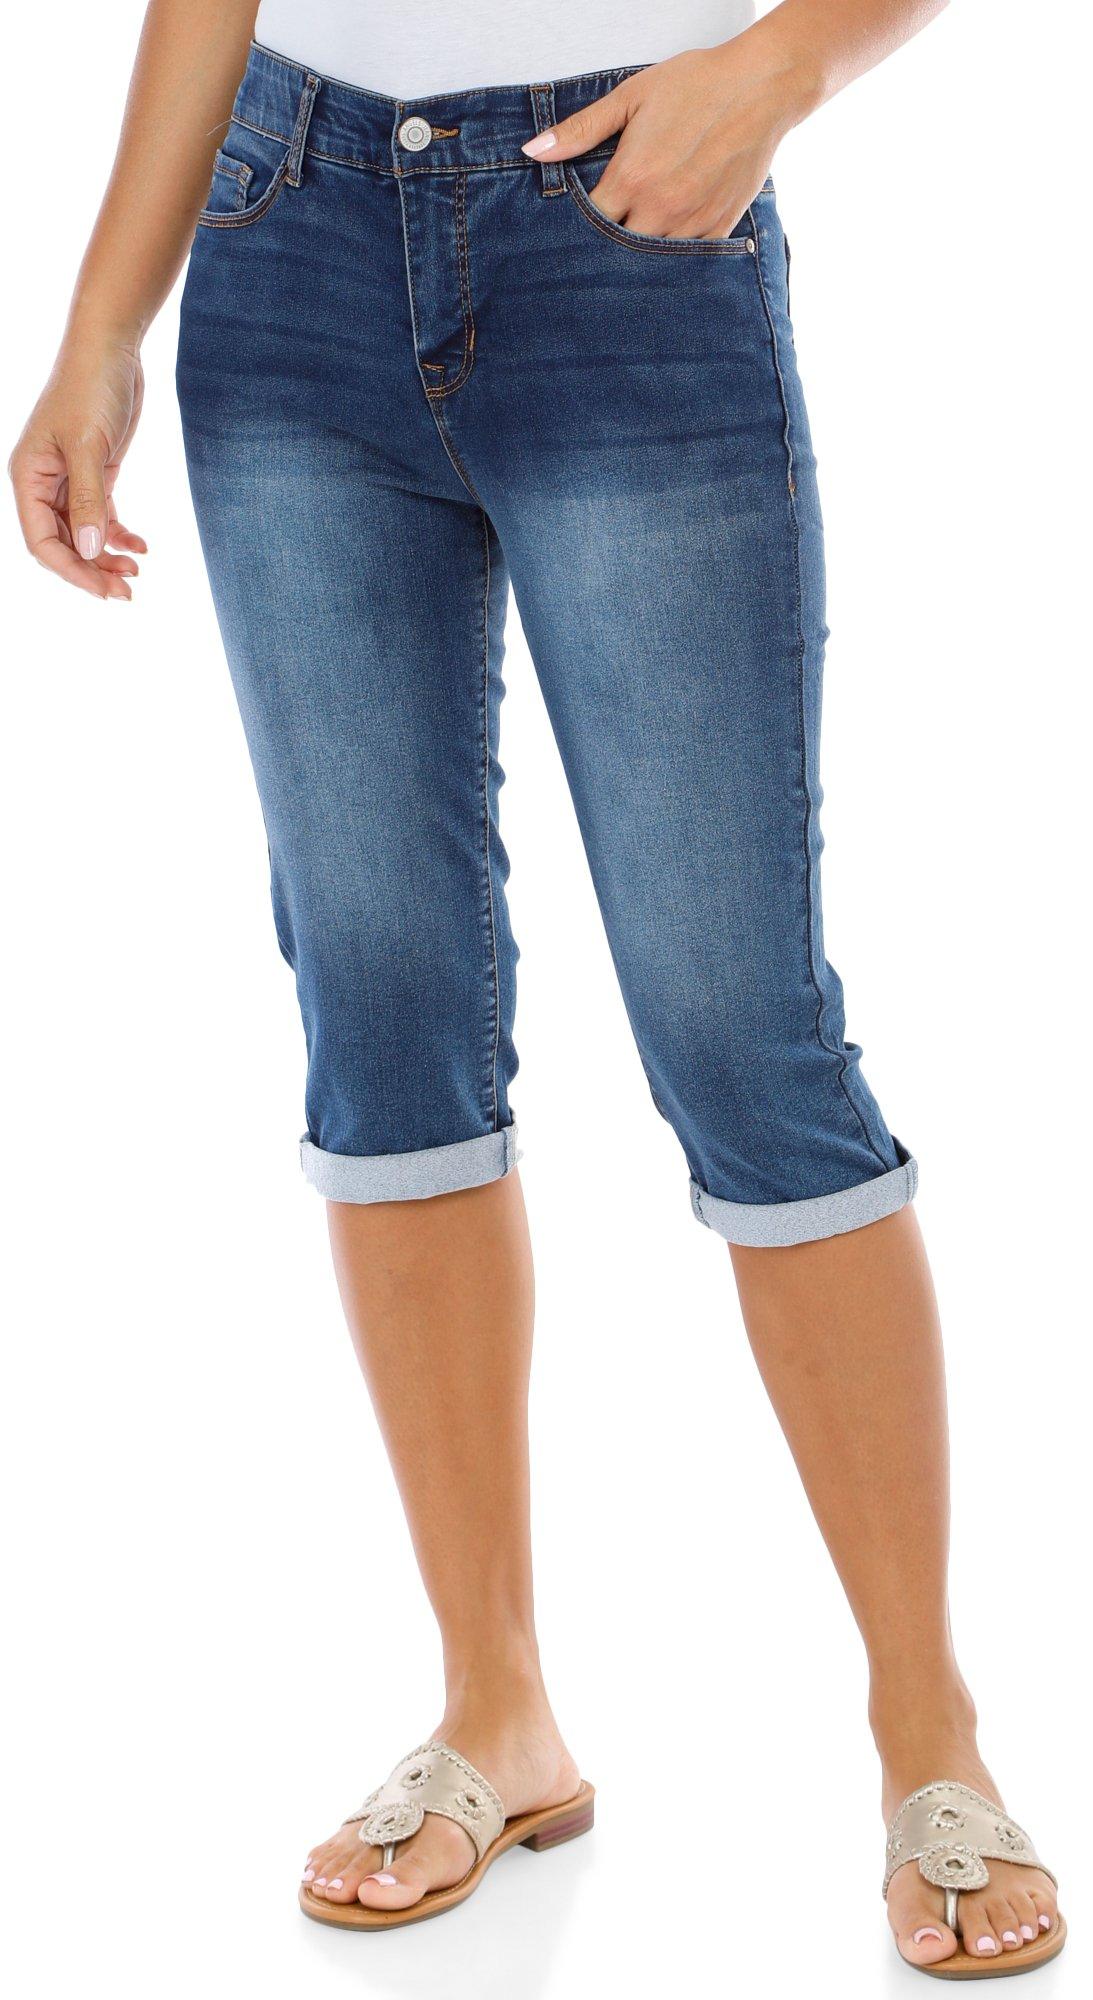 Polyester Pants & Capris for Women: Buy Polyester Pants & Capris for Women  Online at Low Prices on Snapdeal.com